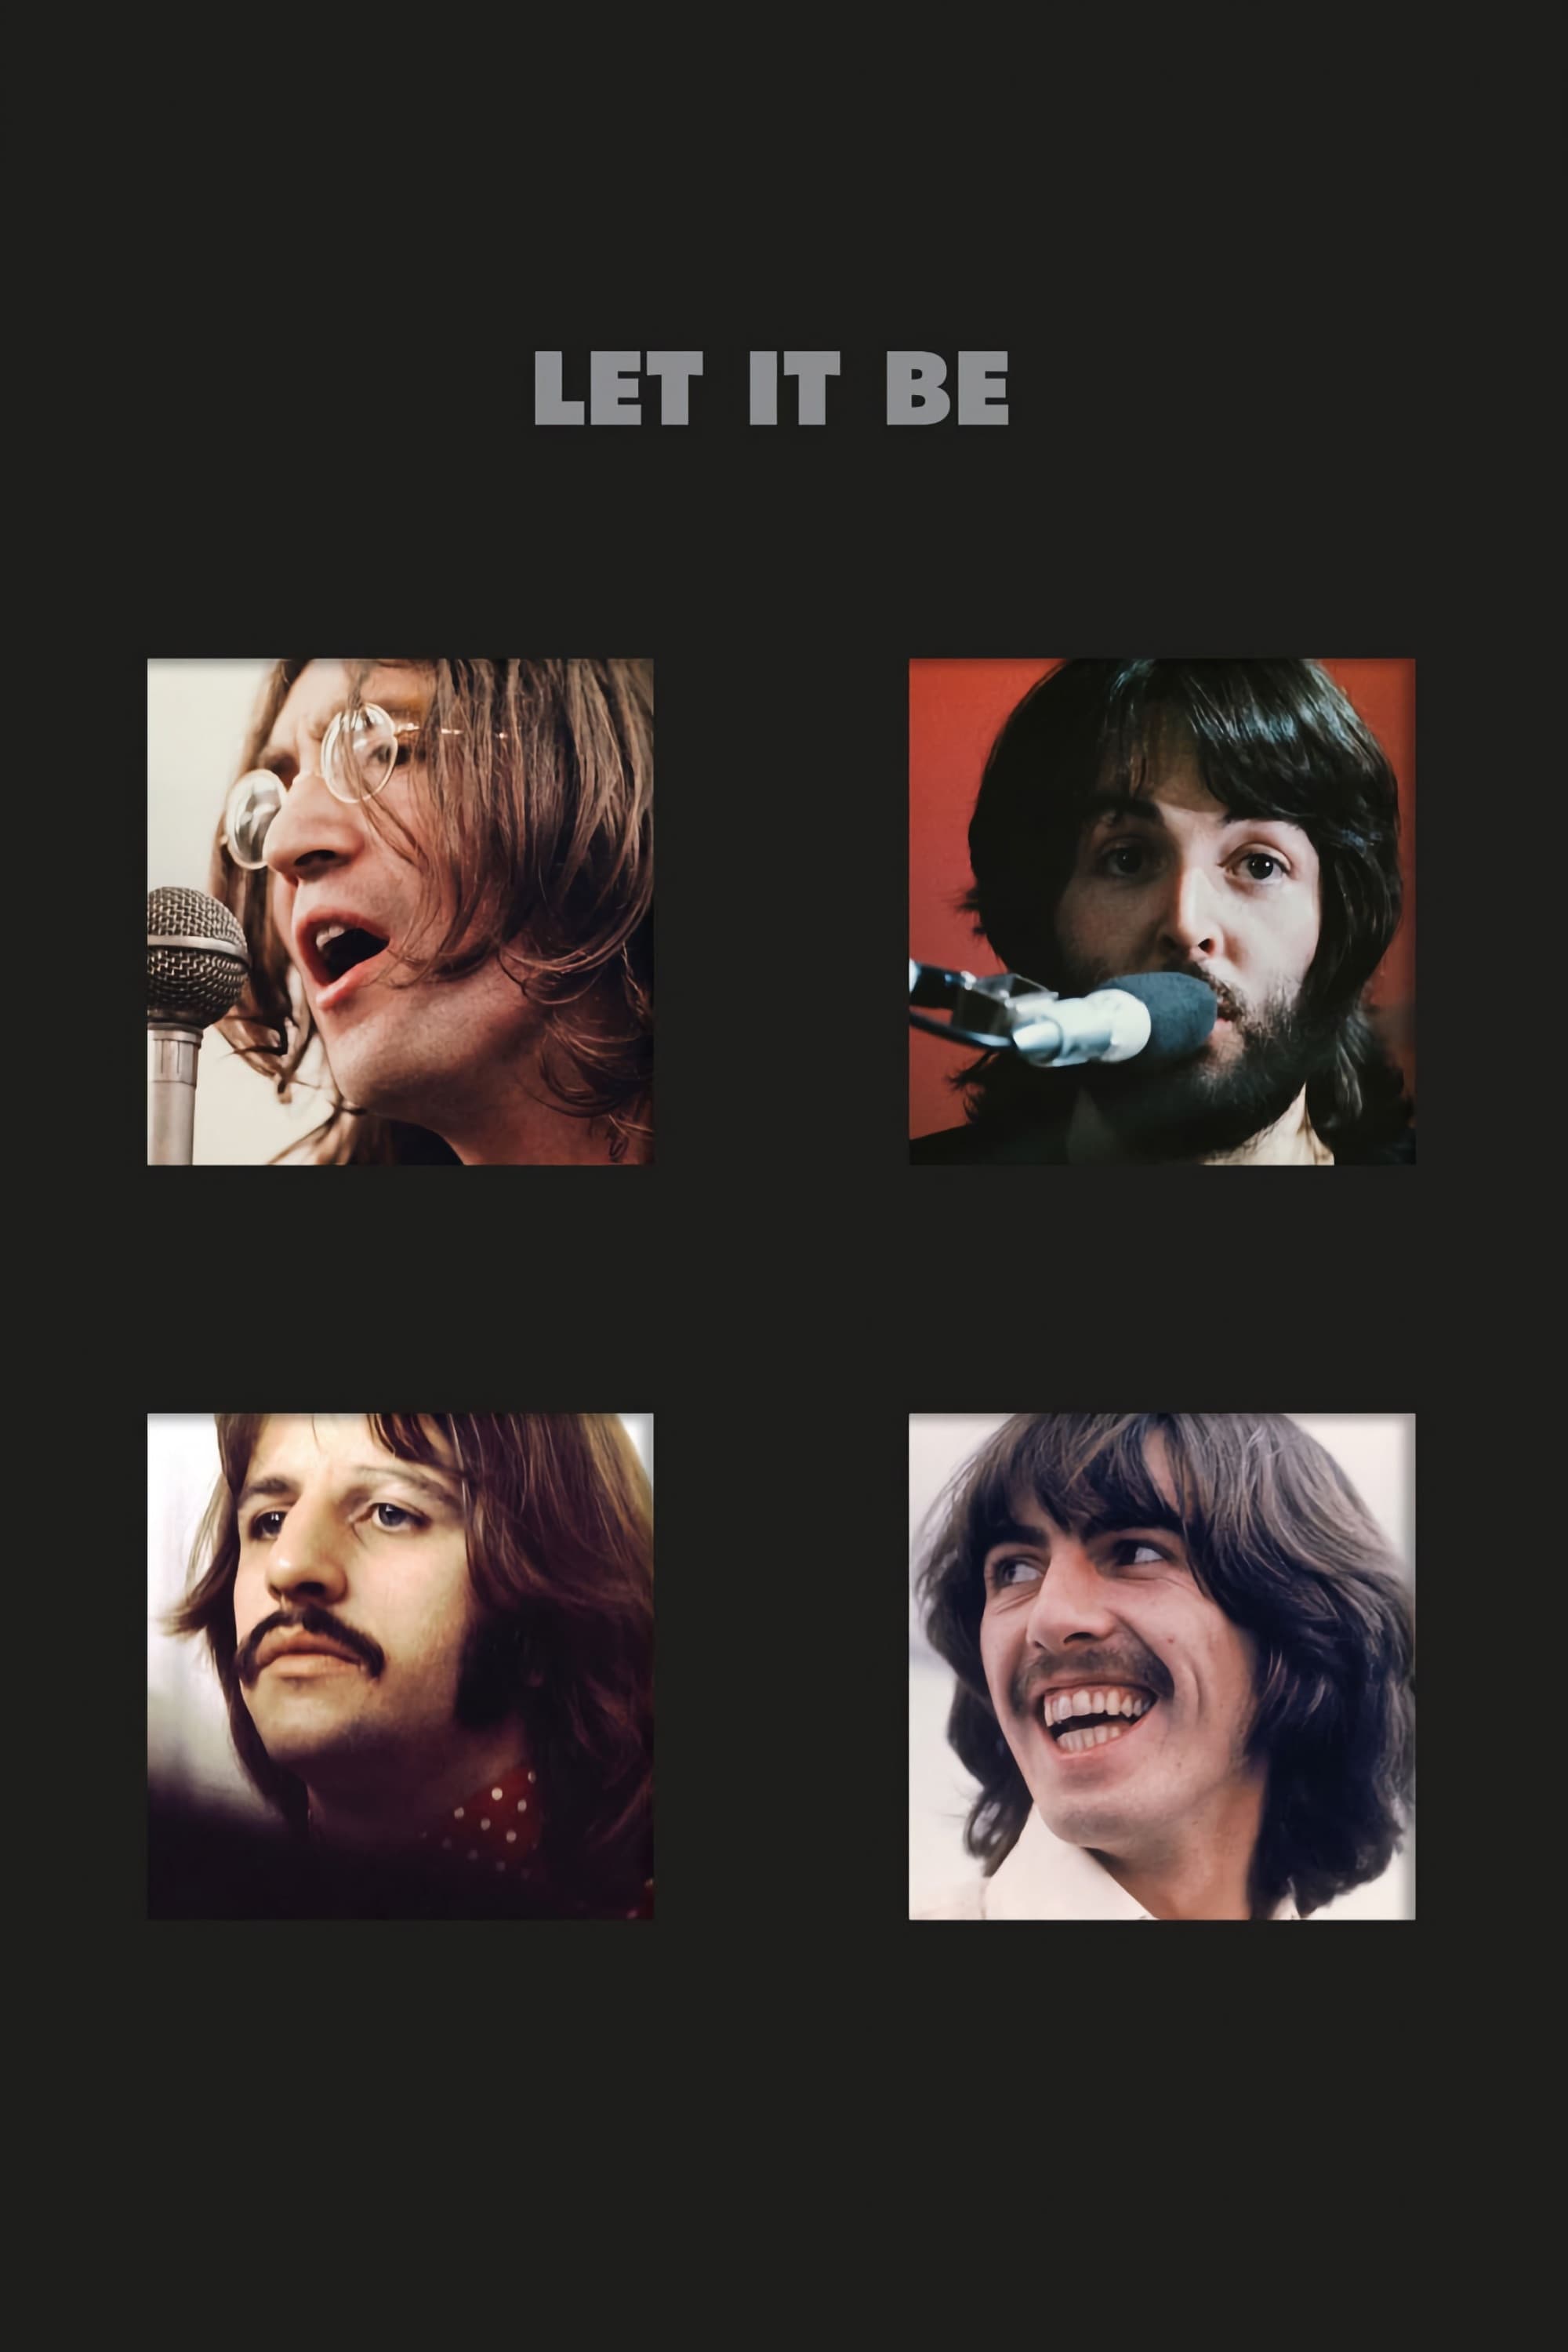 The Beatles Let It Be